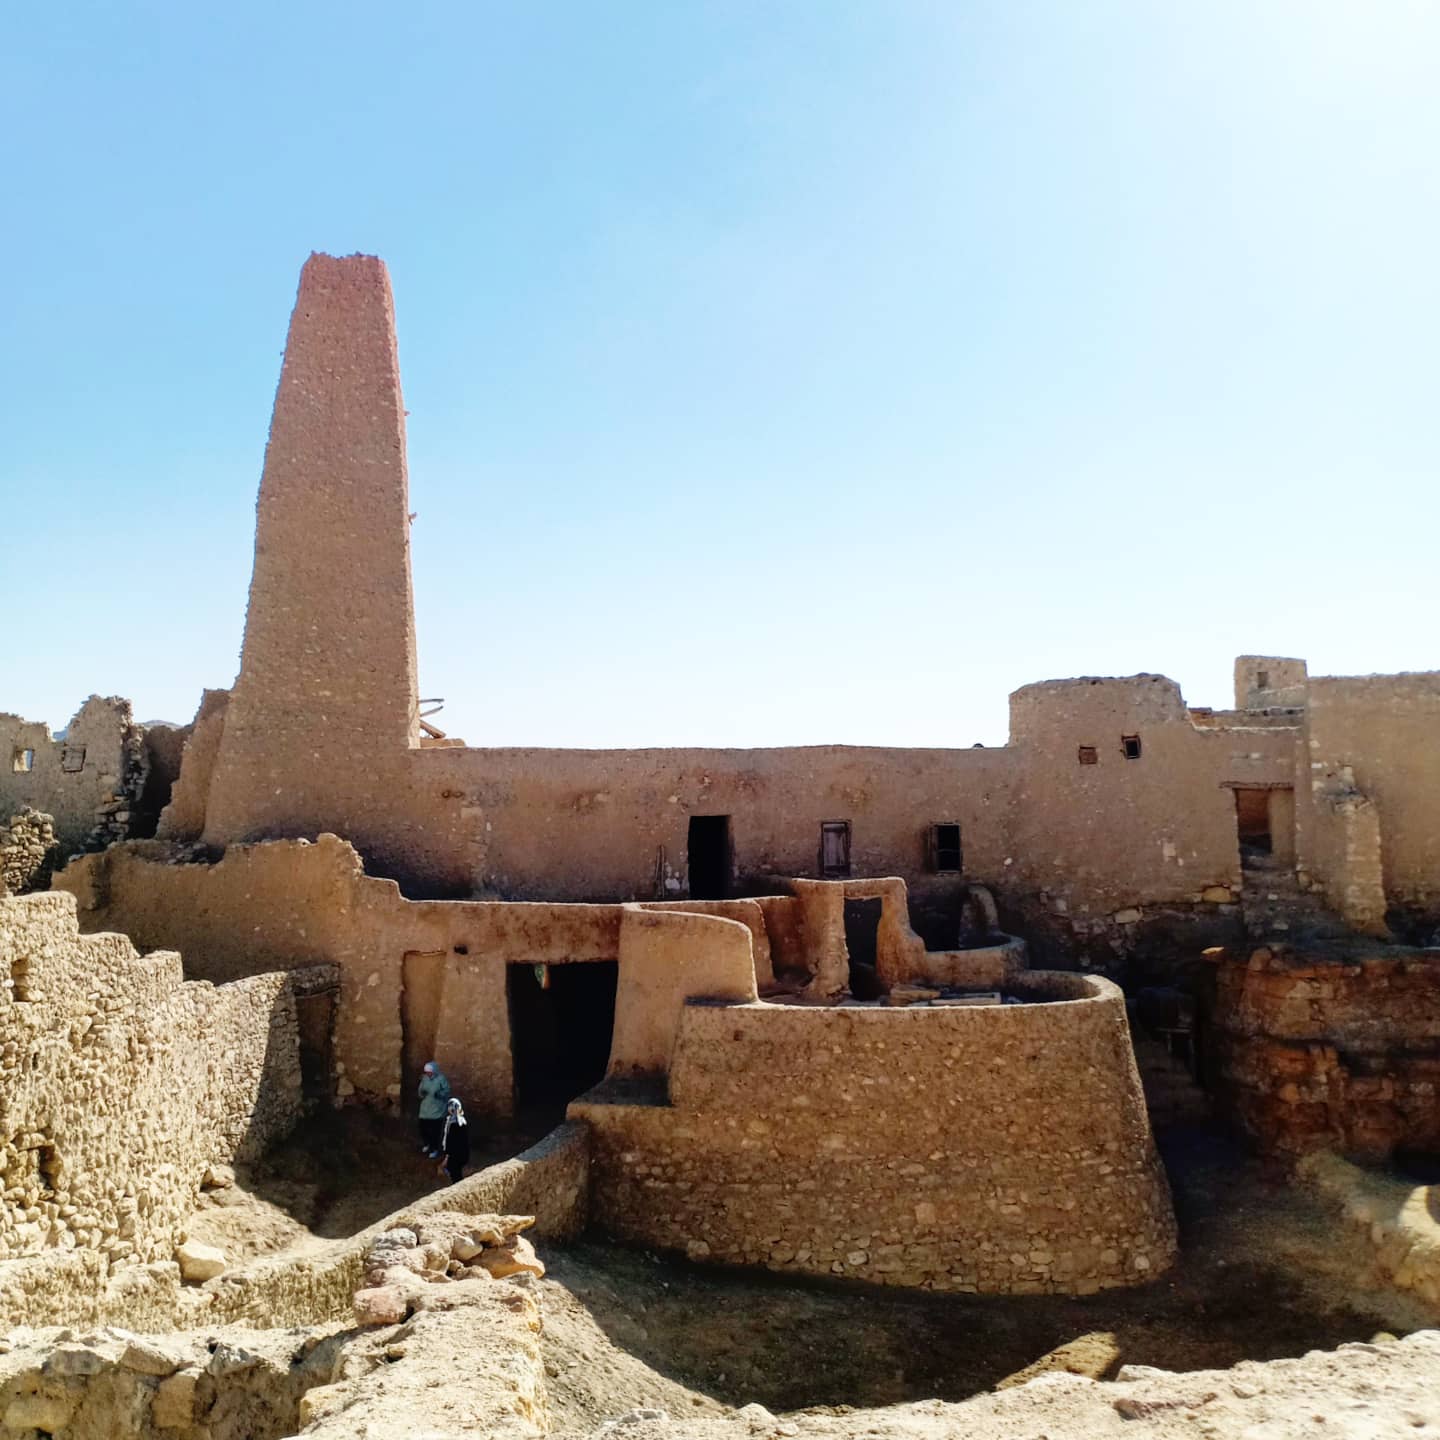 The other side of Oracle  temple - Siwa Oasis - Taken by Rabab Fathy